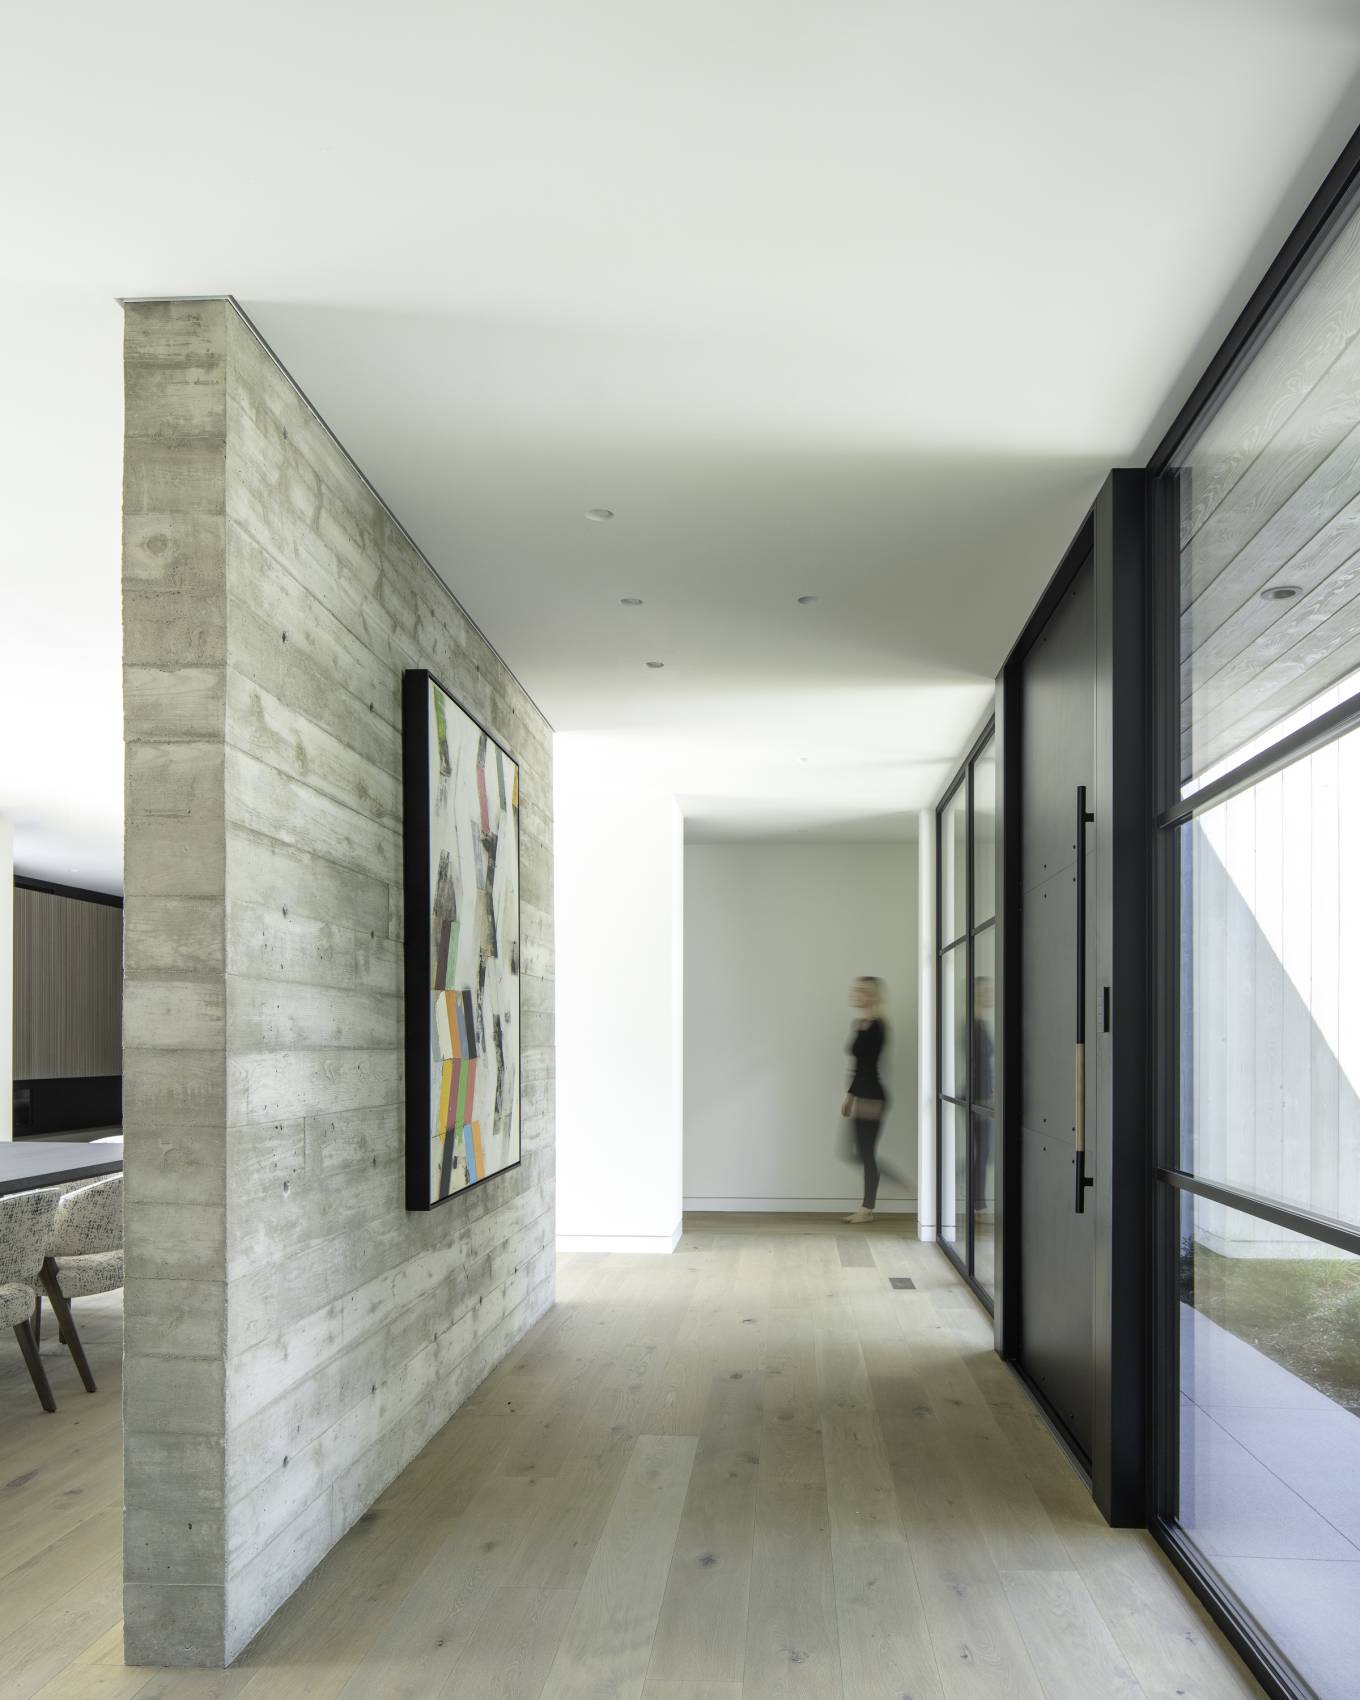 The interior of the Linden Grove residence is a rich compilation of materials such as blackened steel, board-formed concrete, marble, and white oak.